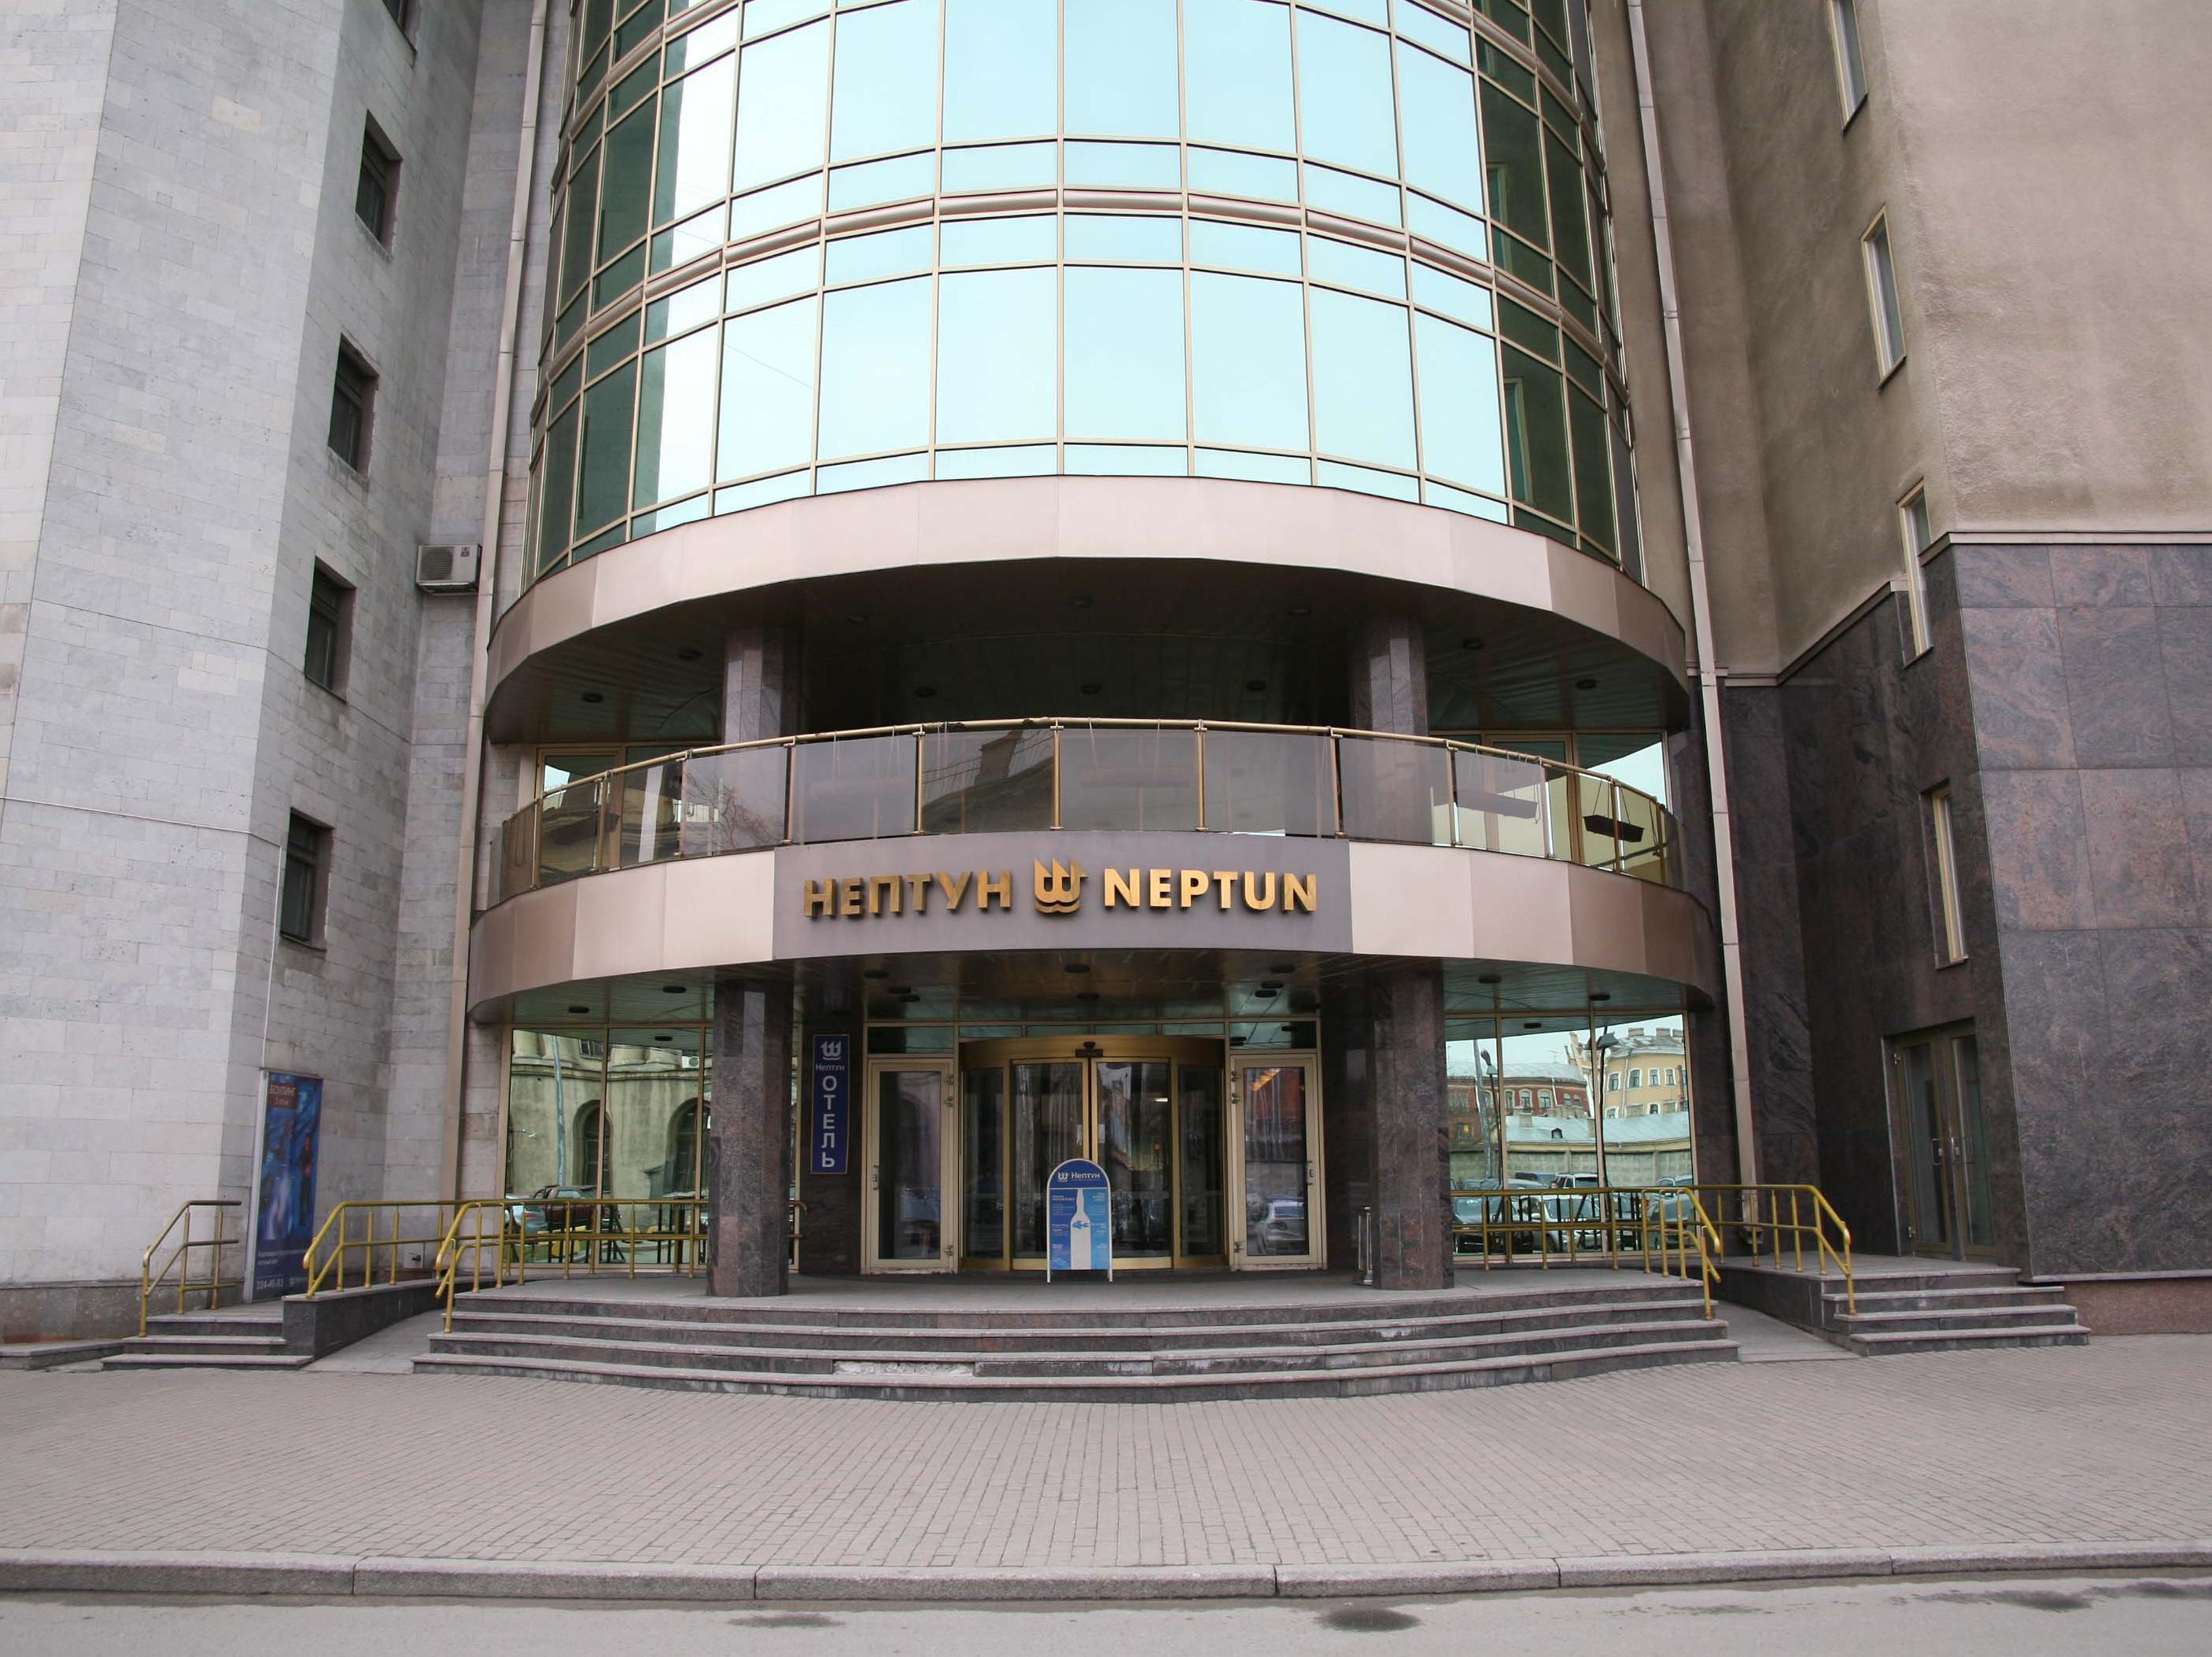 Neptun Business Hotel Russia FAQ 2017, What facilities are there in Neptun Business Hotel Russia 2017, What Languages Spoken are Supported in Neptun Business Hotel Russia 2017, Which payment cards are accepted in Neptun Business Hotel Russia , Russia Neptun Business Hotel room facilities and services Q&A 2017, Russia Neptun Business Hotel online booking services 2017, Russia Neptun Business Hotel address 2017, Russia Neptun Business Hotel telephone number 2017,Russia Neptun Business Hotel map 2017, Russia Neptun Business Hotel traffic guide 2017, how to go Russia Neptun Business Hotel, Russia Neptun Business Hotel booking online 2017, Russia Neptun Business Hotel room types 2017.